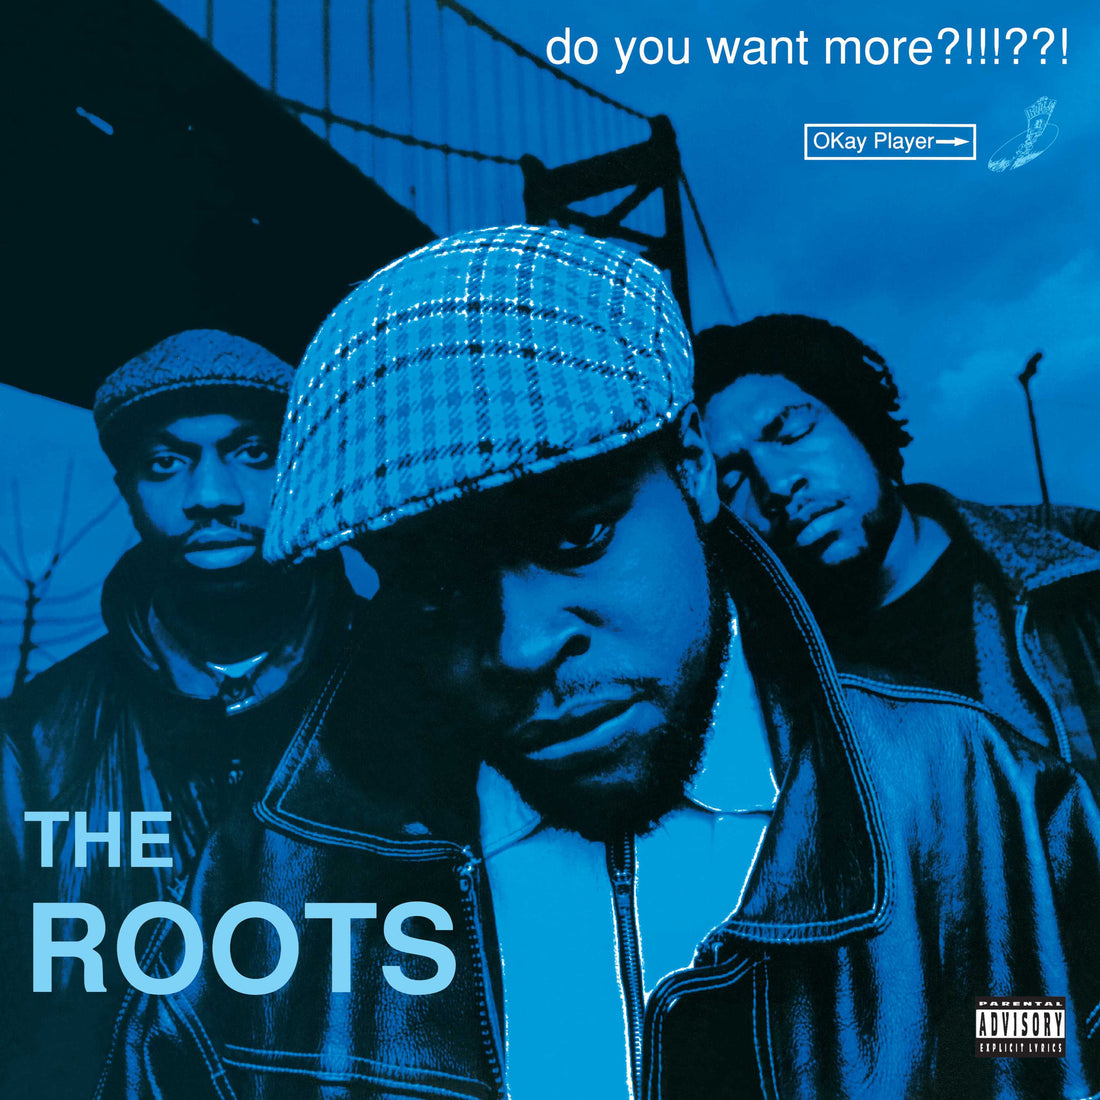 The Roots "Do You Want More?!!!??!" 2xLP Vinyl